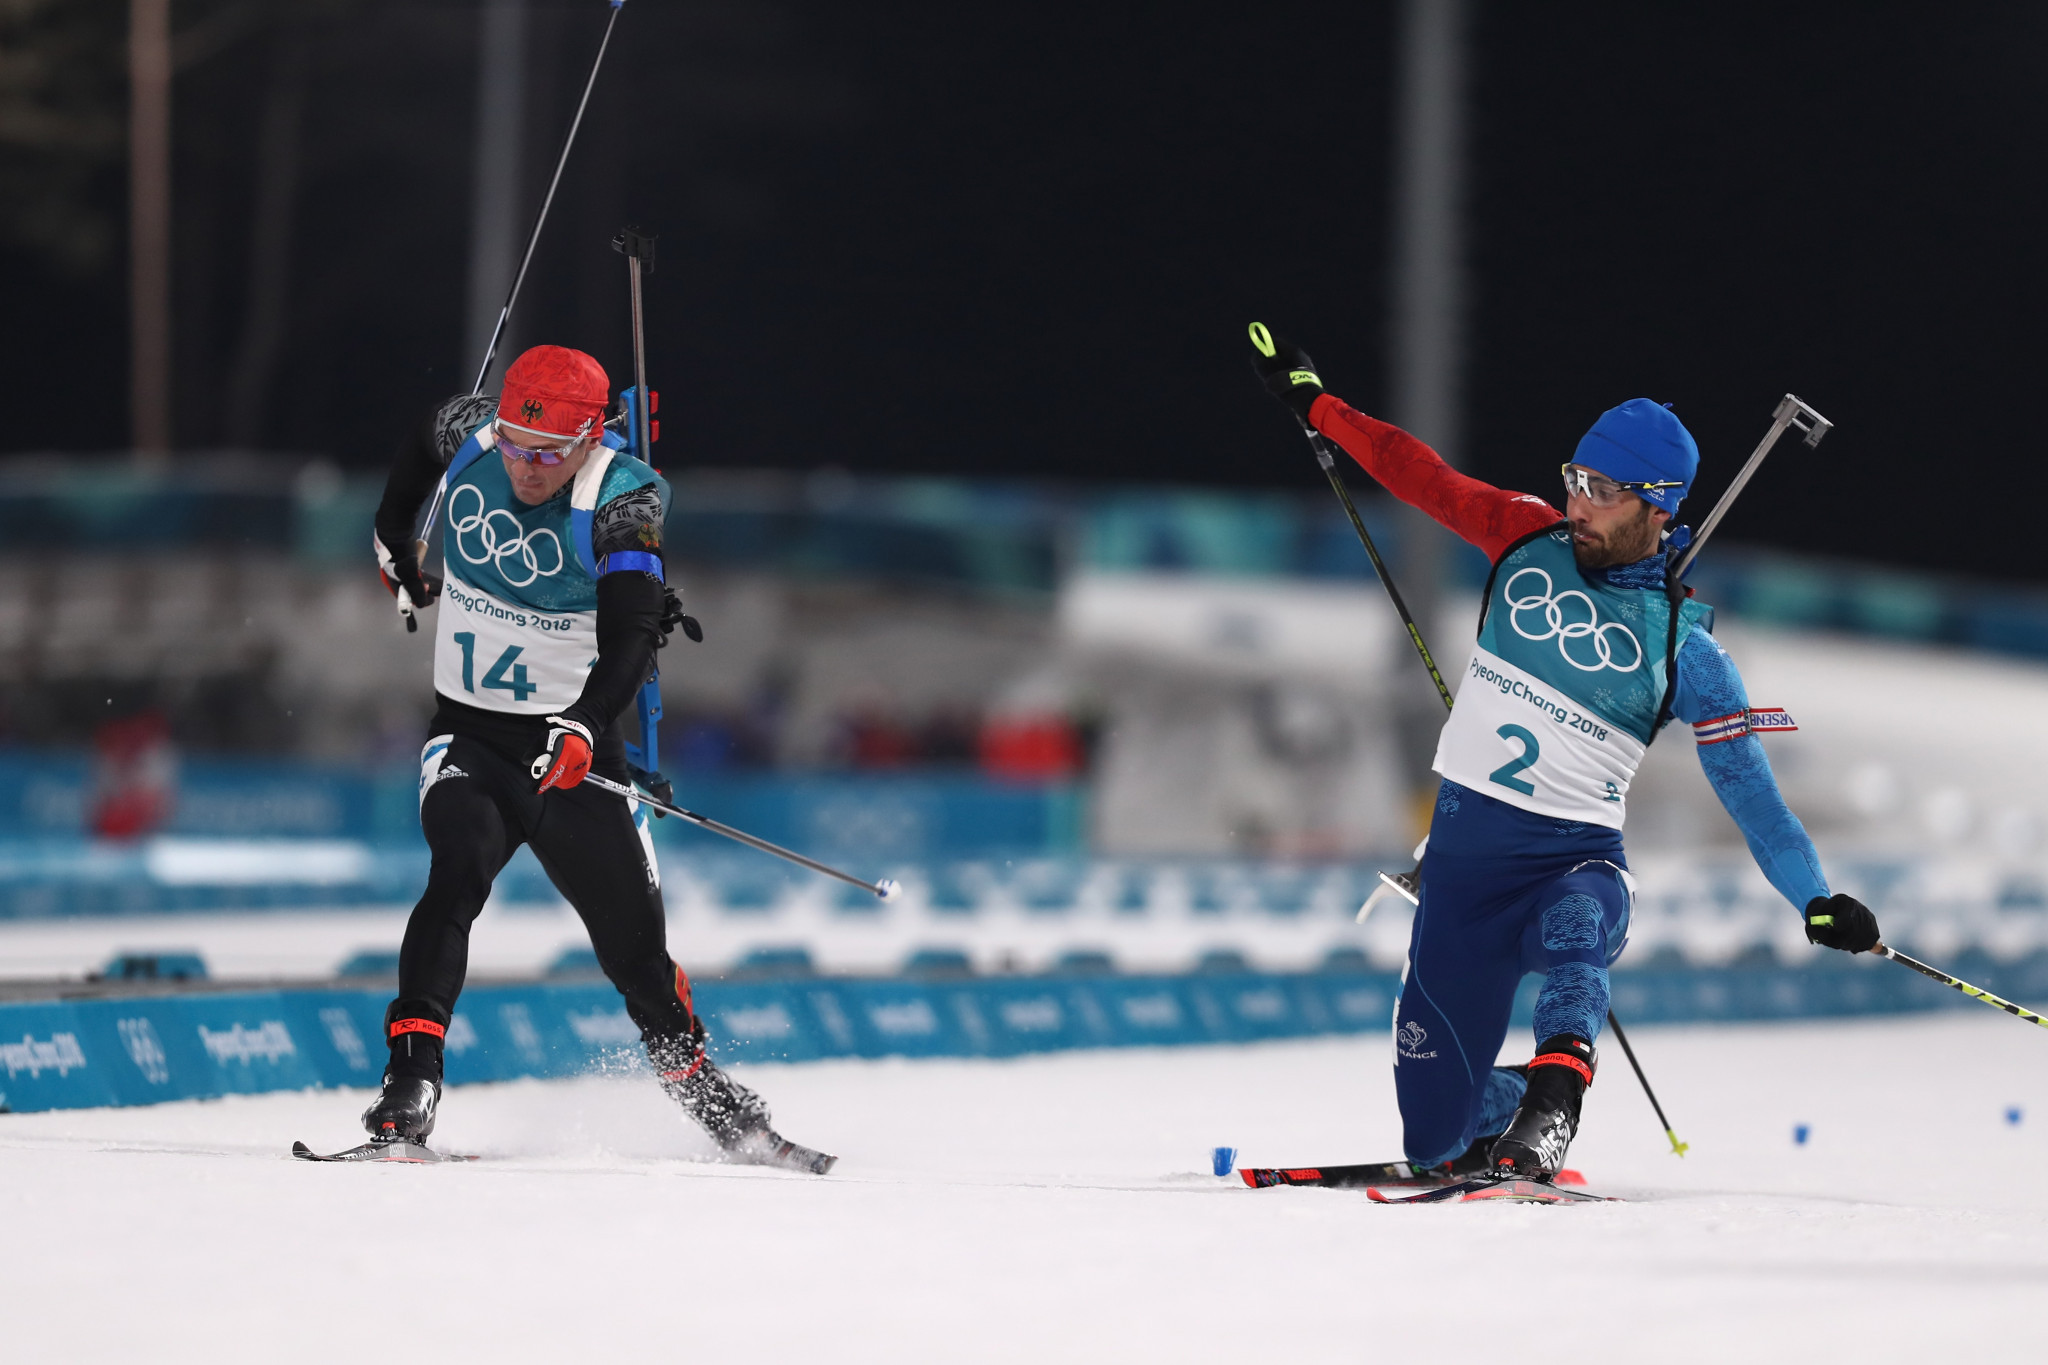 Fourcade edges Schempp in photo finish to become France's most successful ever Olympic athlete